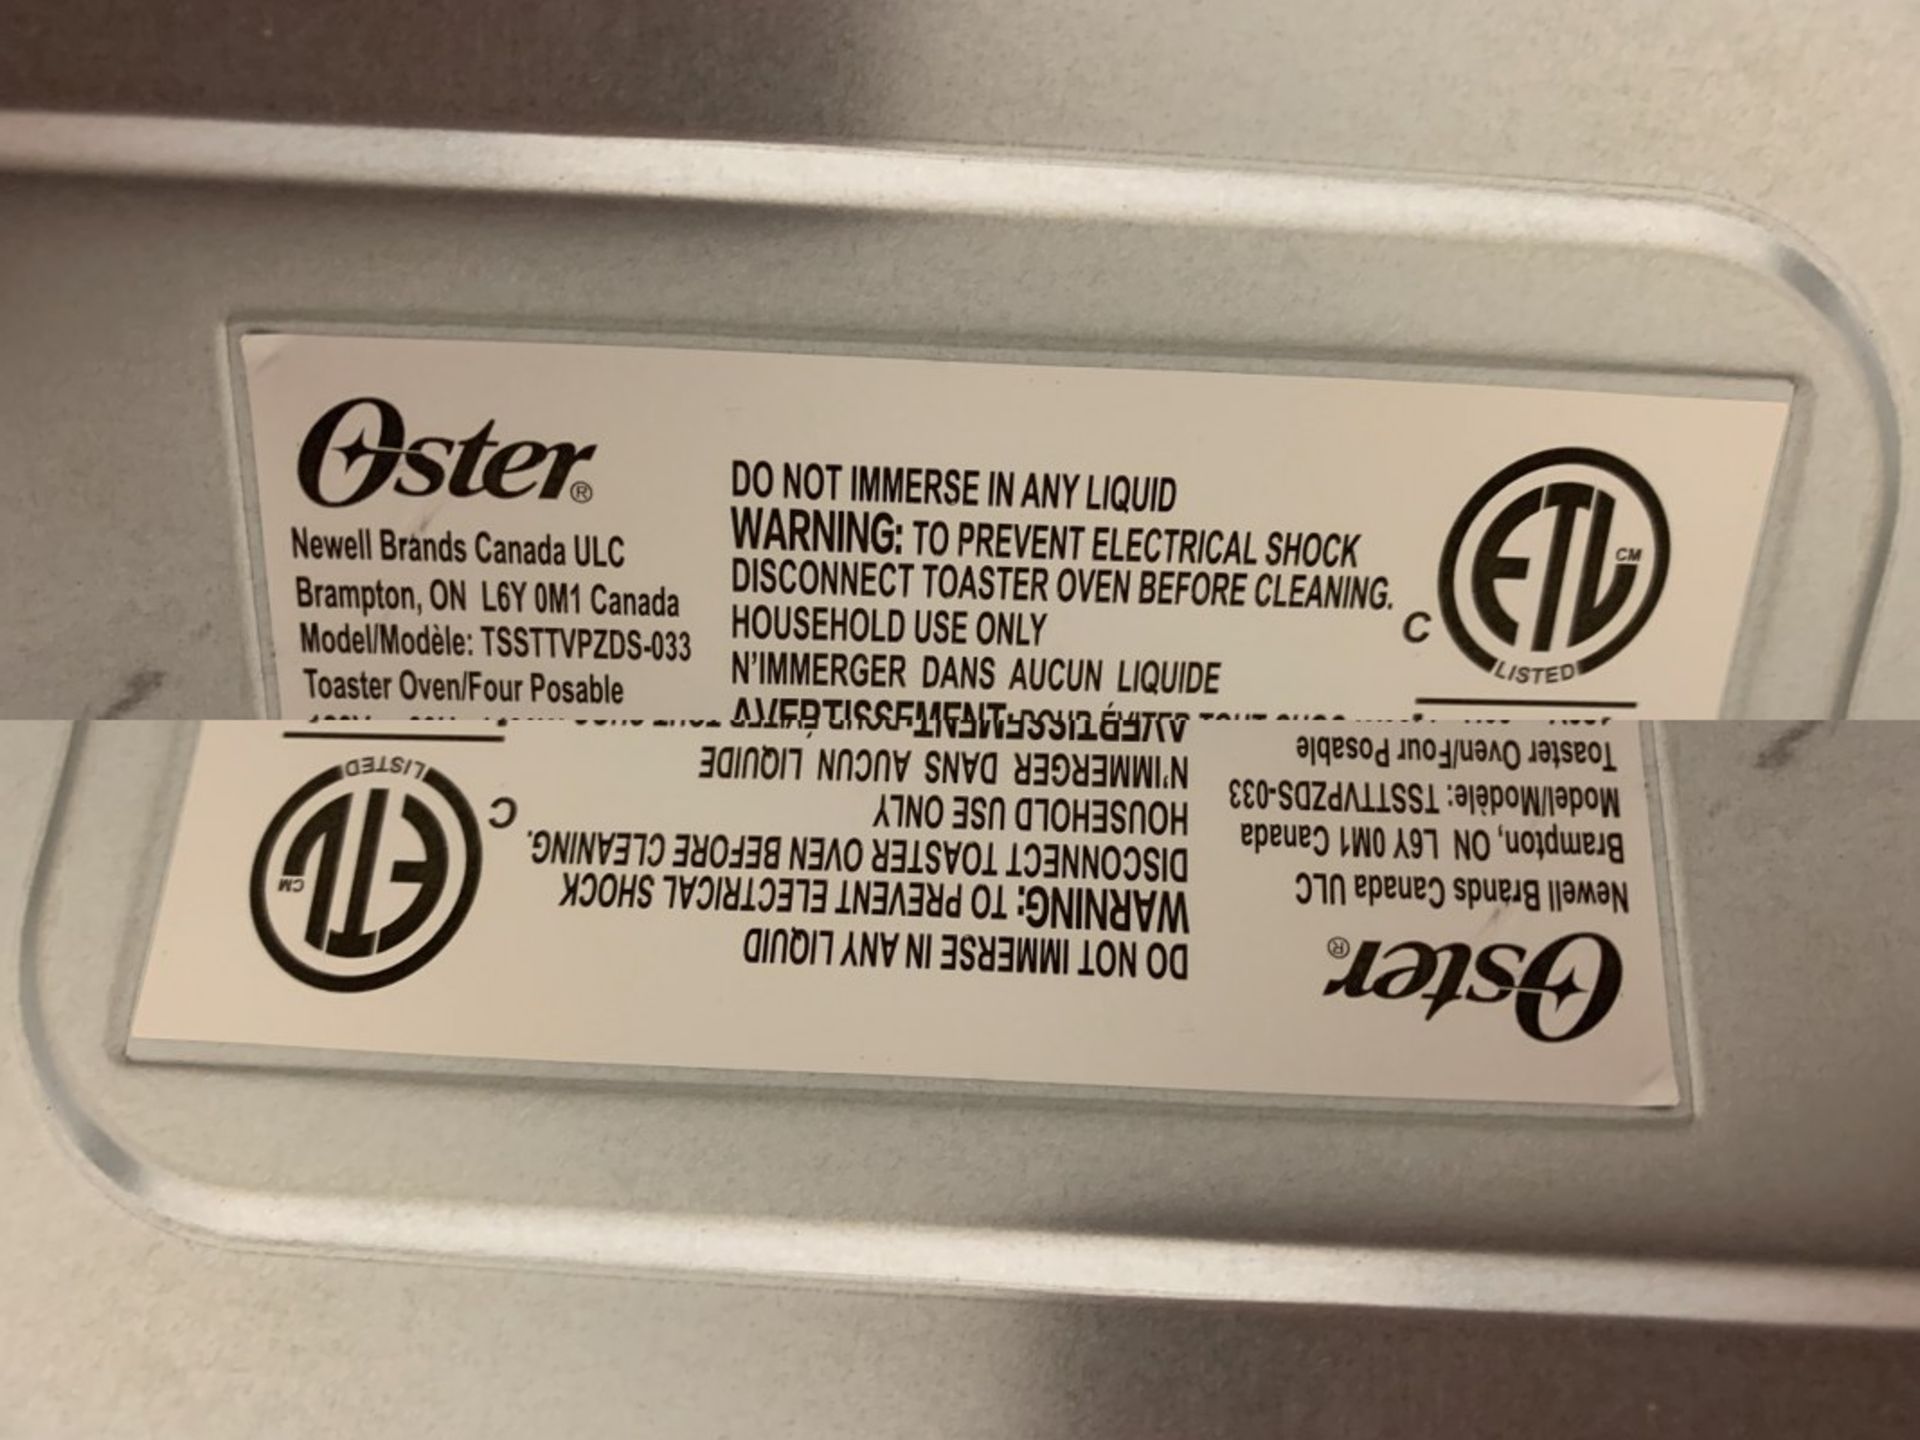 Oster - Toaster Oven - Image 2 of 3